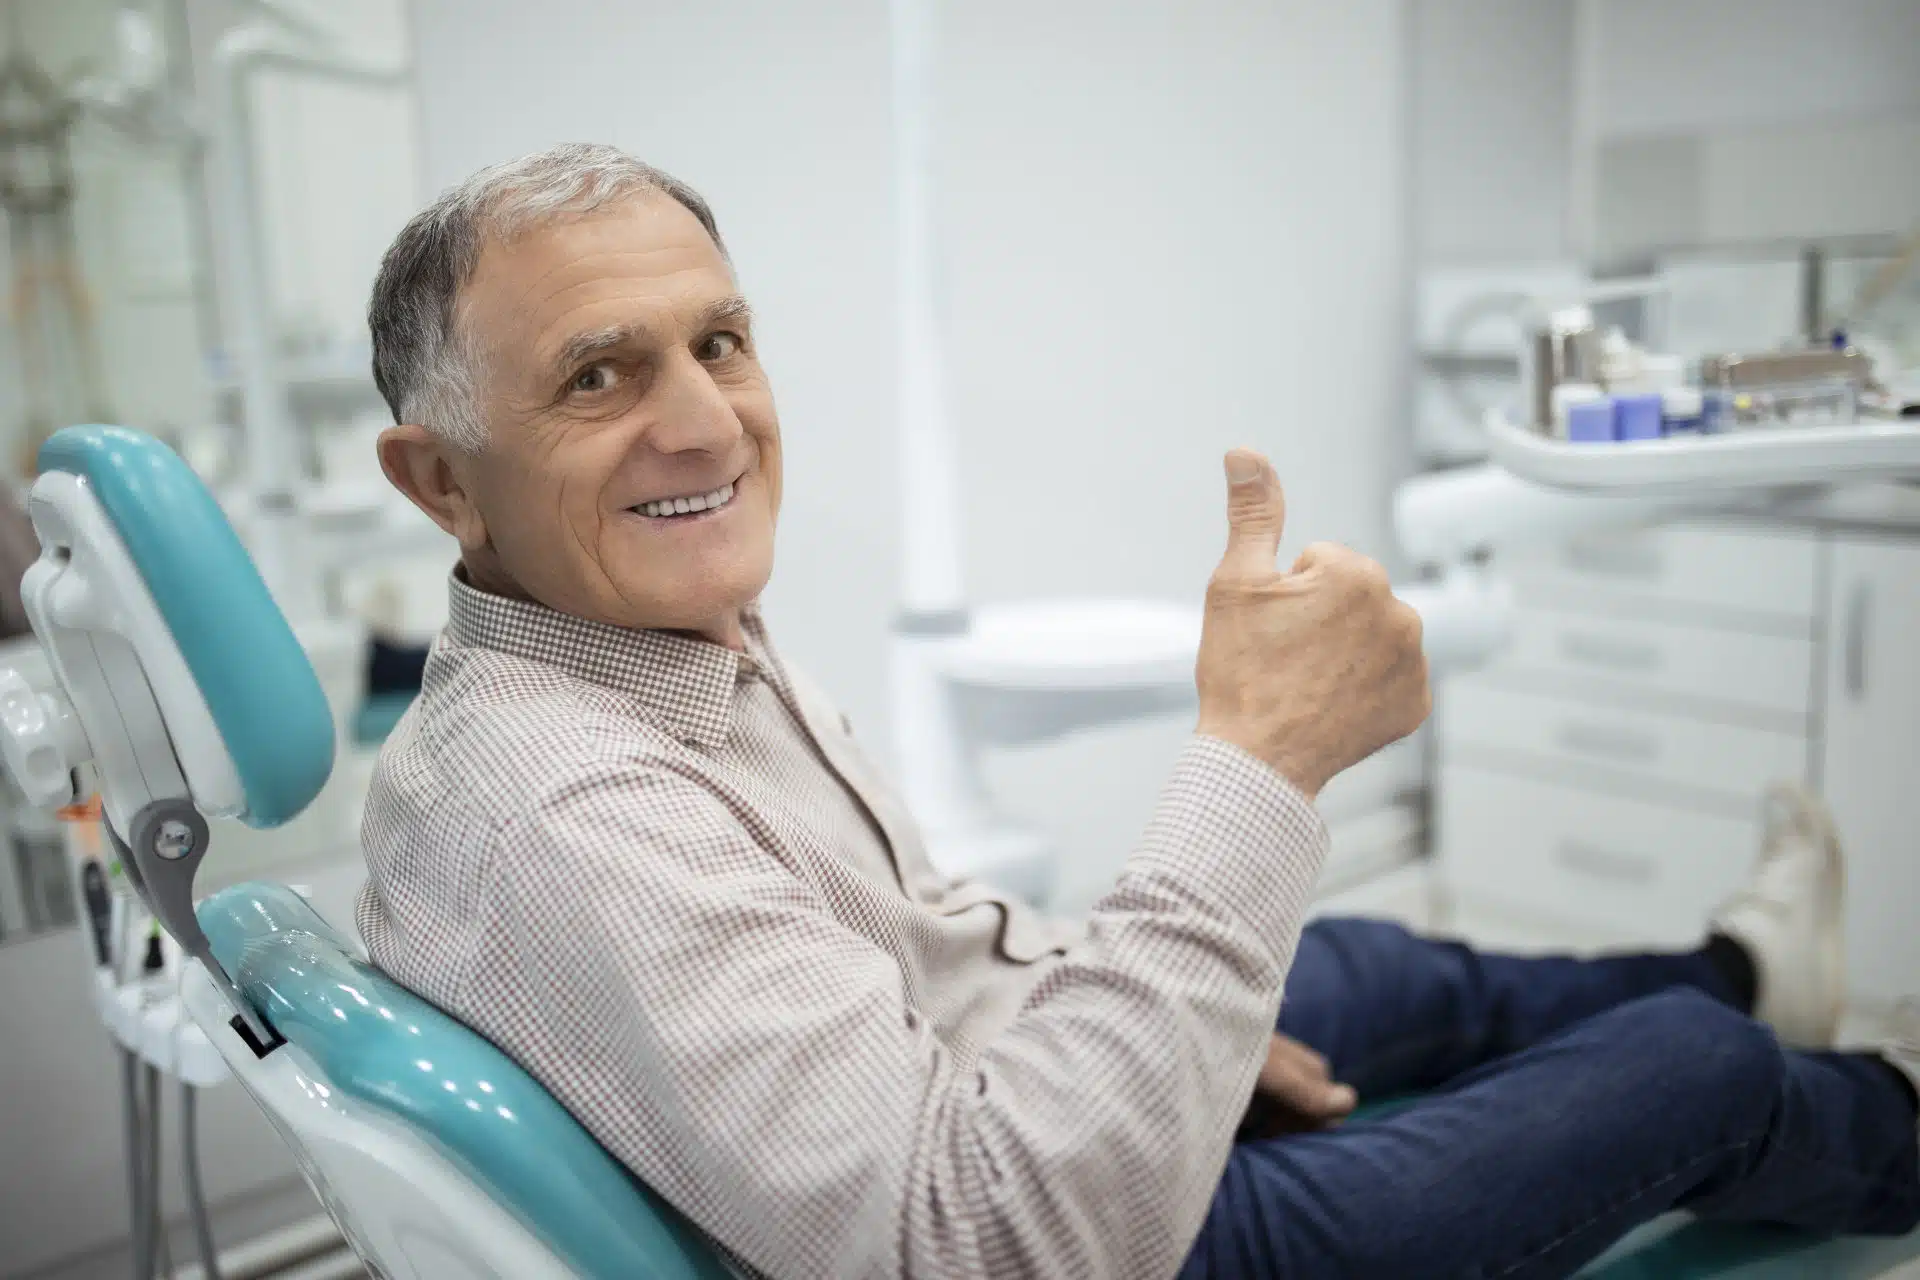 Whether you need partial or full dentures, our customized solutions are crafted with precision to fit your mouth perfectly.